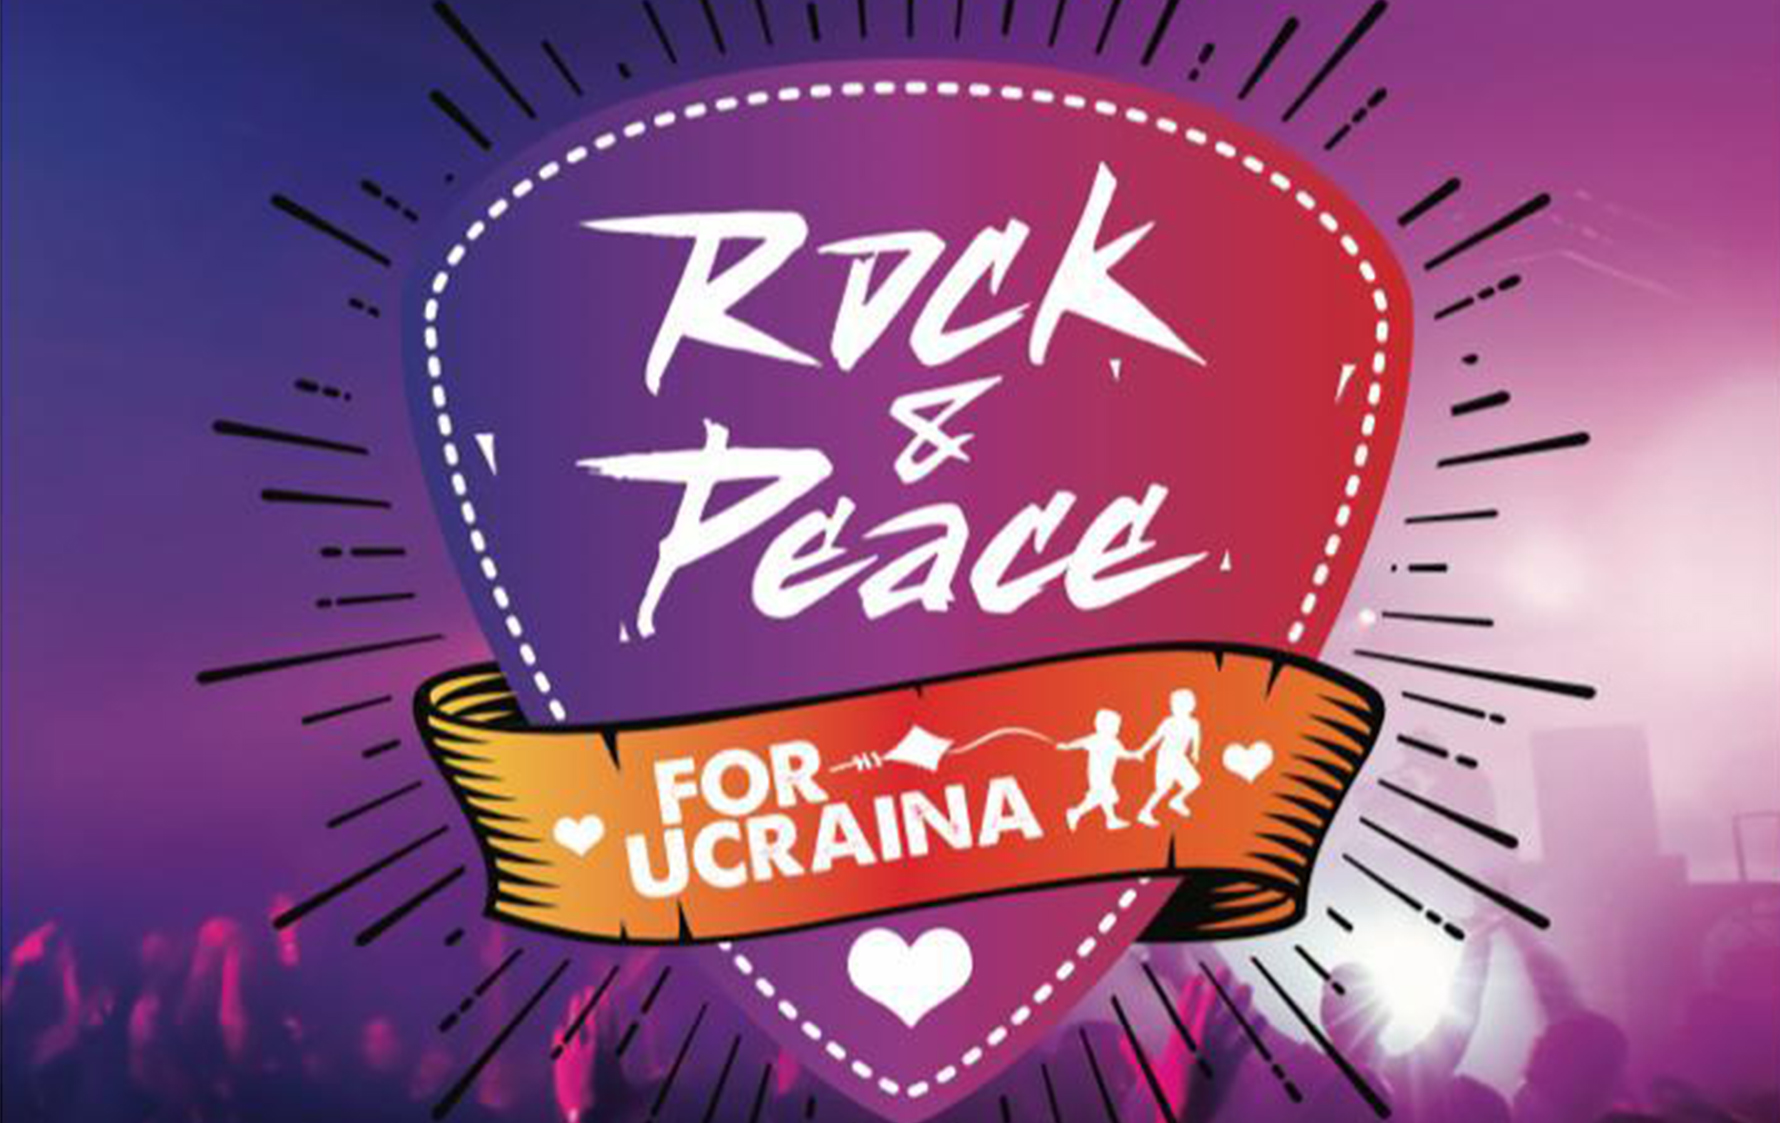 Rock and Peace for Ucraina – 11/06 a Forcoli